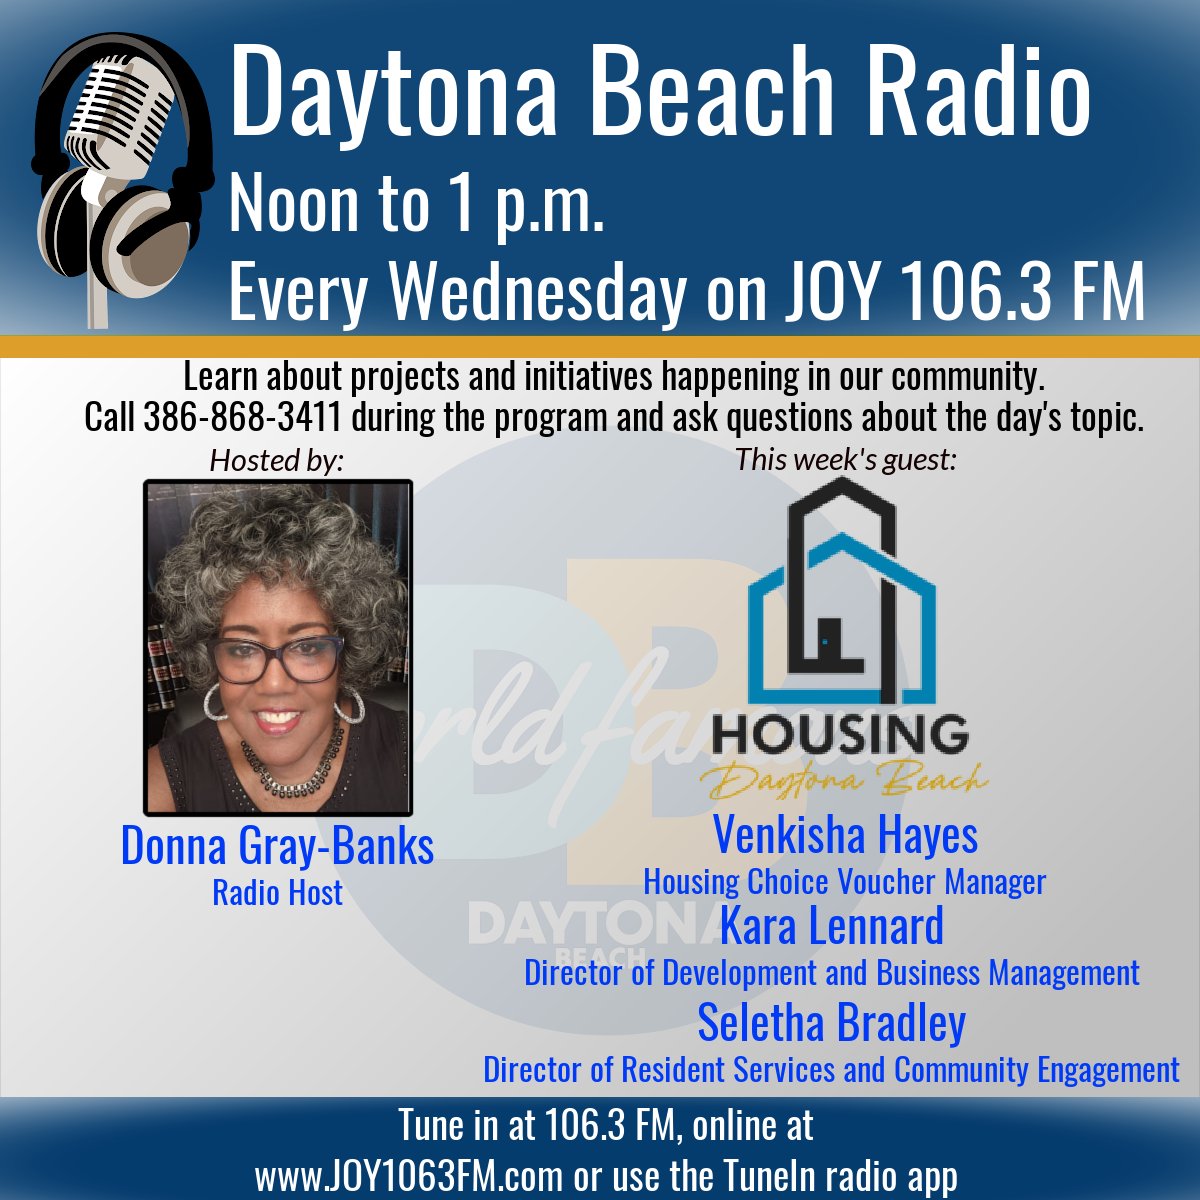 Join us Wednesday at noon on #DaytonaBeachRadio for a discussion with the Daytona Beach Housing Authority about resources, housing and applications. Listeners can call in with questions or comments at (386) 868-3411. #CityDaytonaBeach #DaytonaBeachNews #BeInformed